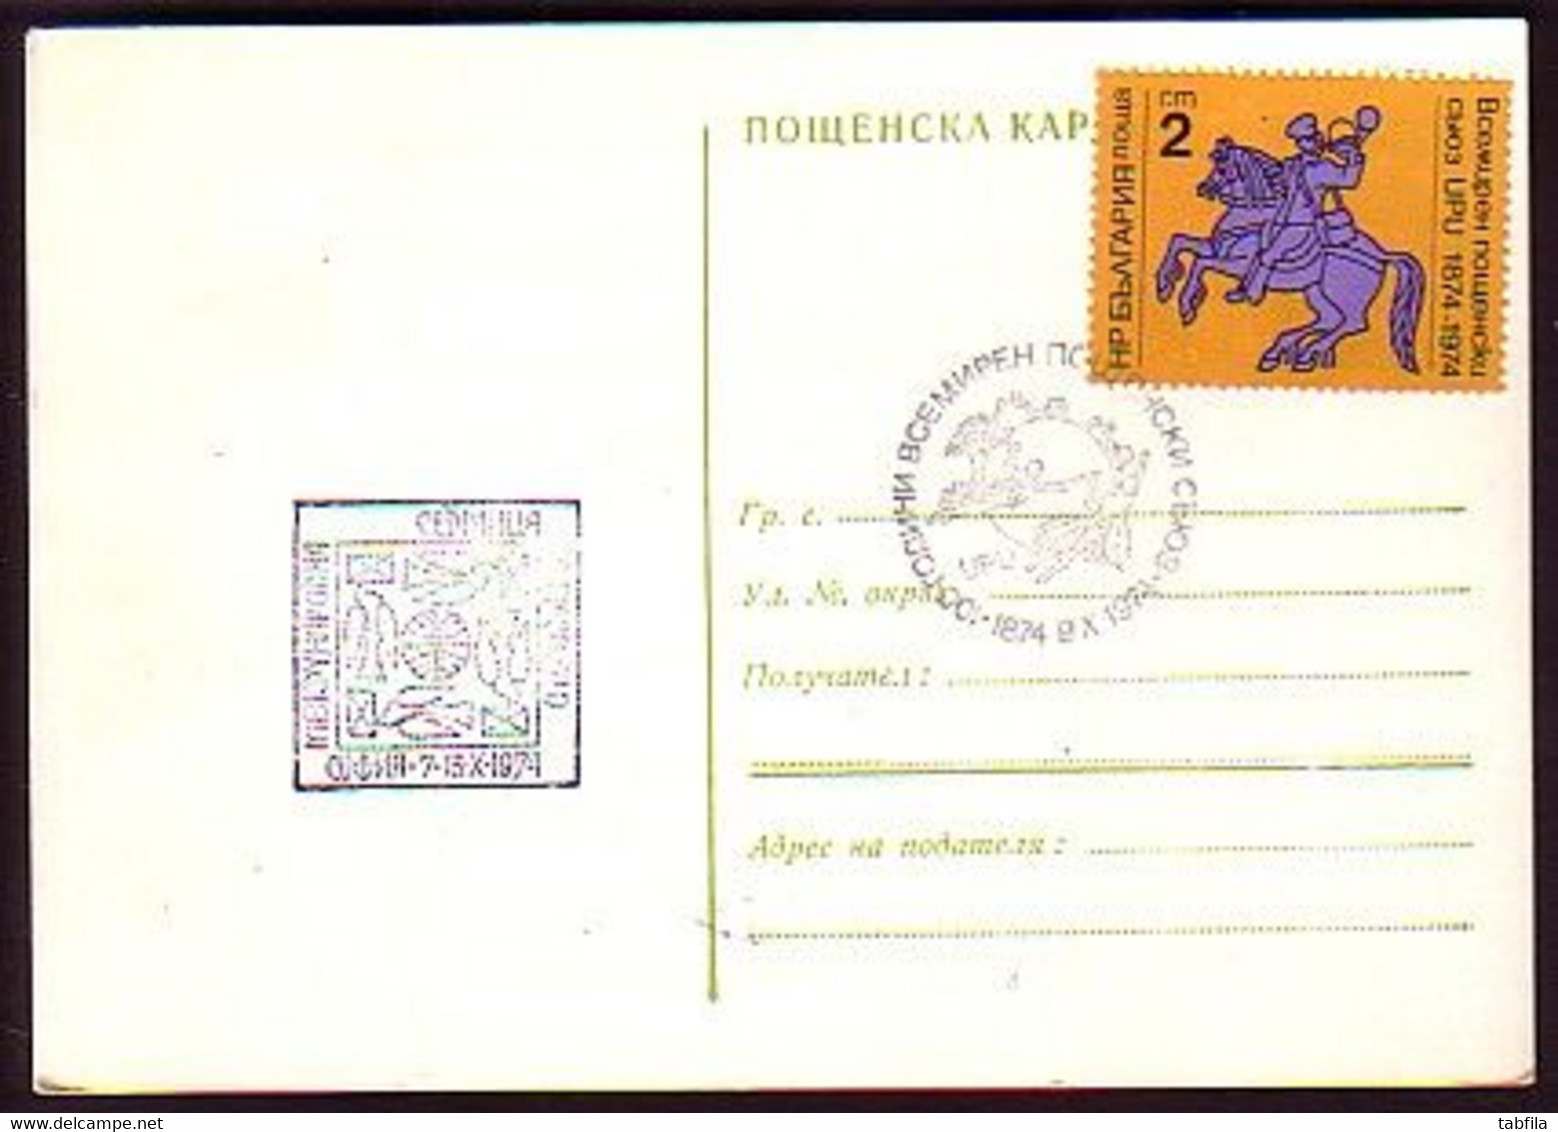 BULGARIA  - 1974 - Week Of The Letter And The Philatelic Stamp - P.card Spec.cache - Postcards